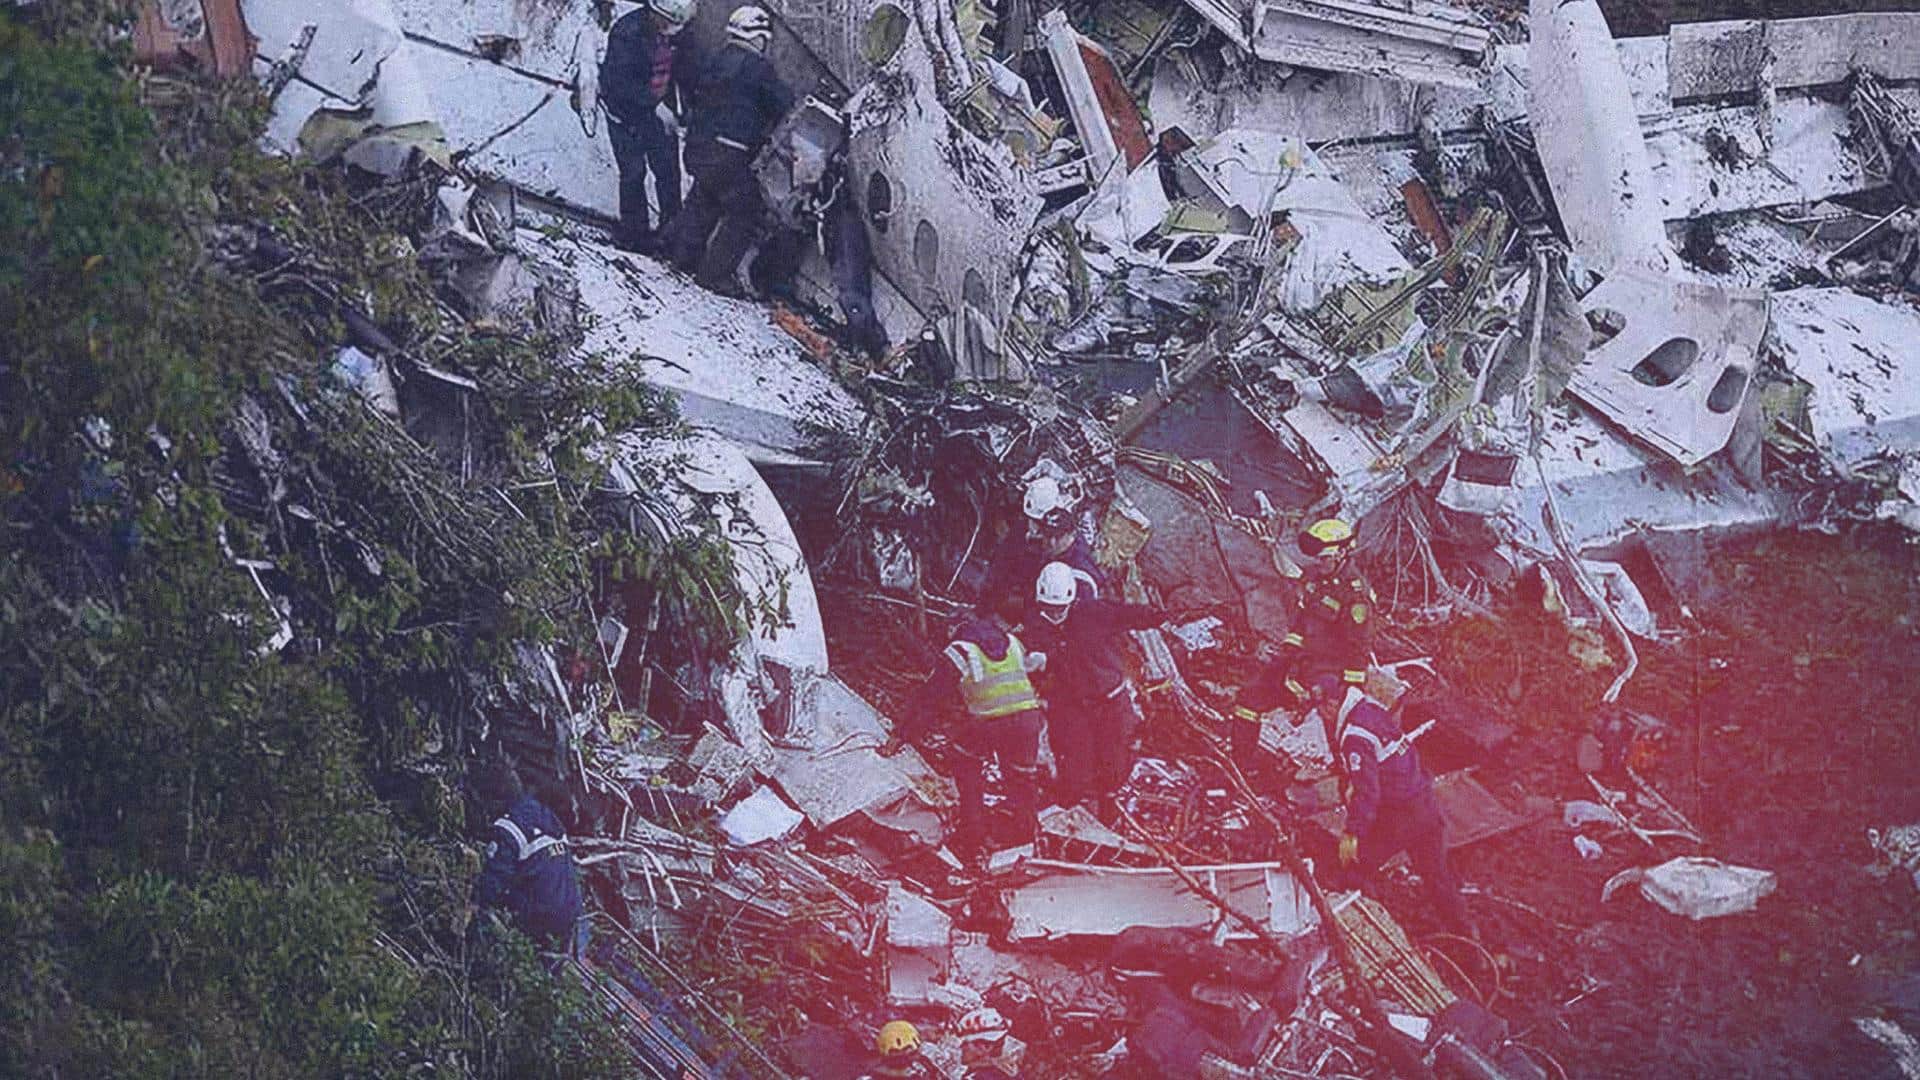 Colombia: President says 4 children survived plane crash, military disagrees